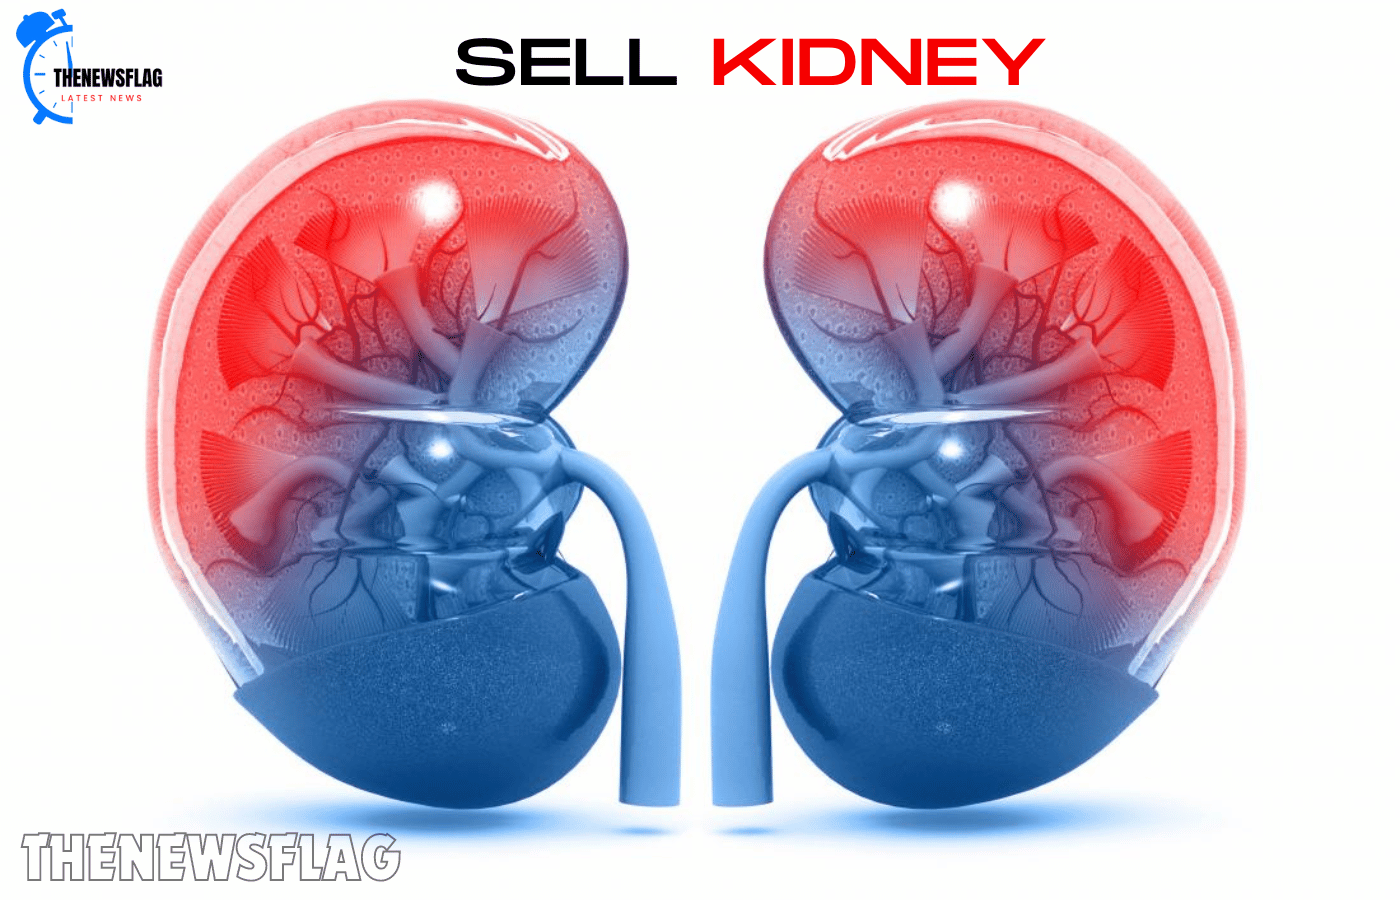 CA from Bengaluru loses more than ₹6 lakh in kidney sales after trying.